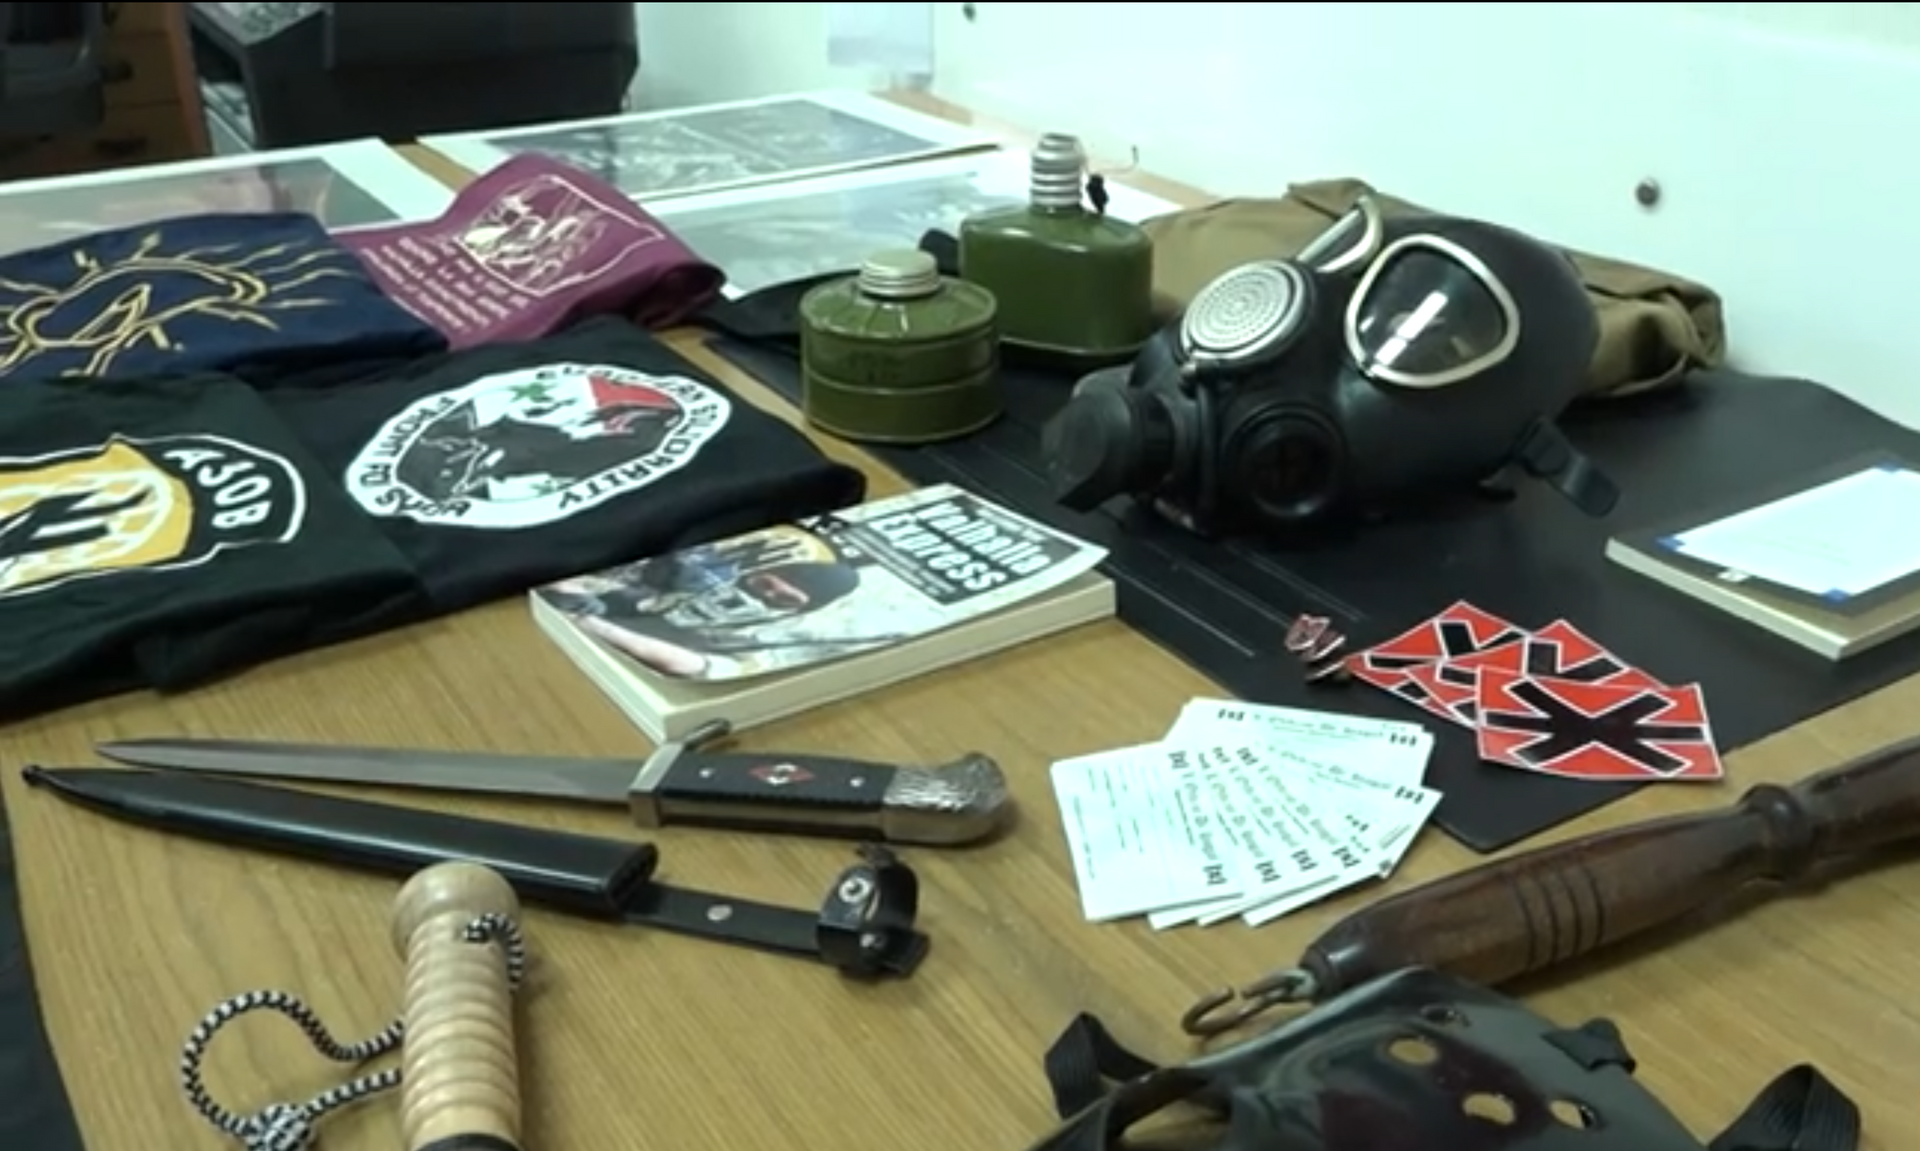 Image captures Nazi paraphernalia seized in around 30 raids on members of the “Order of Hagal” throughout Italy. - Sputnik International, 1920, 15.11.2022